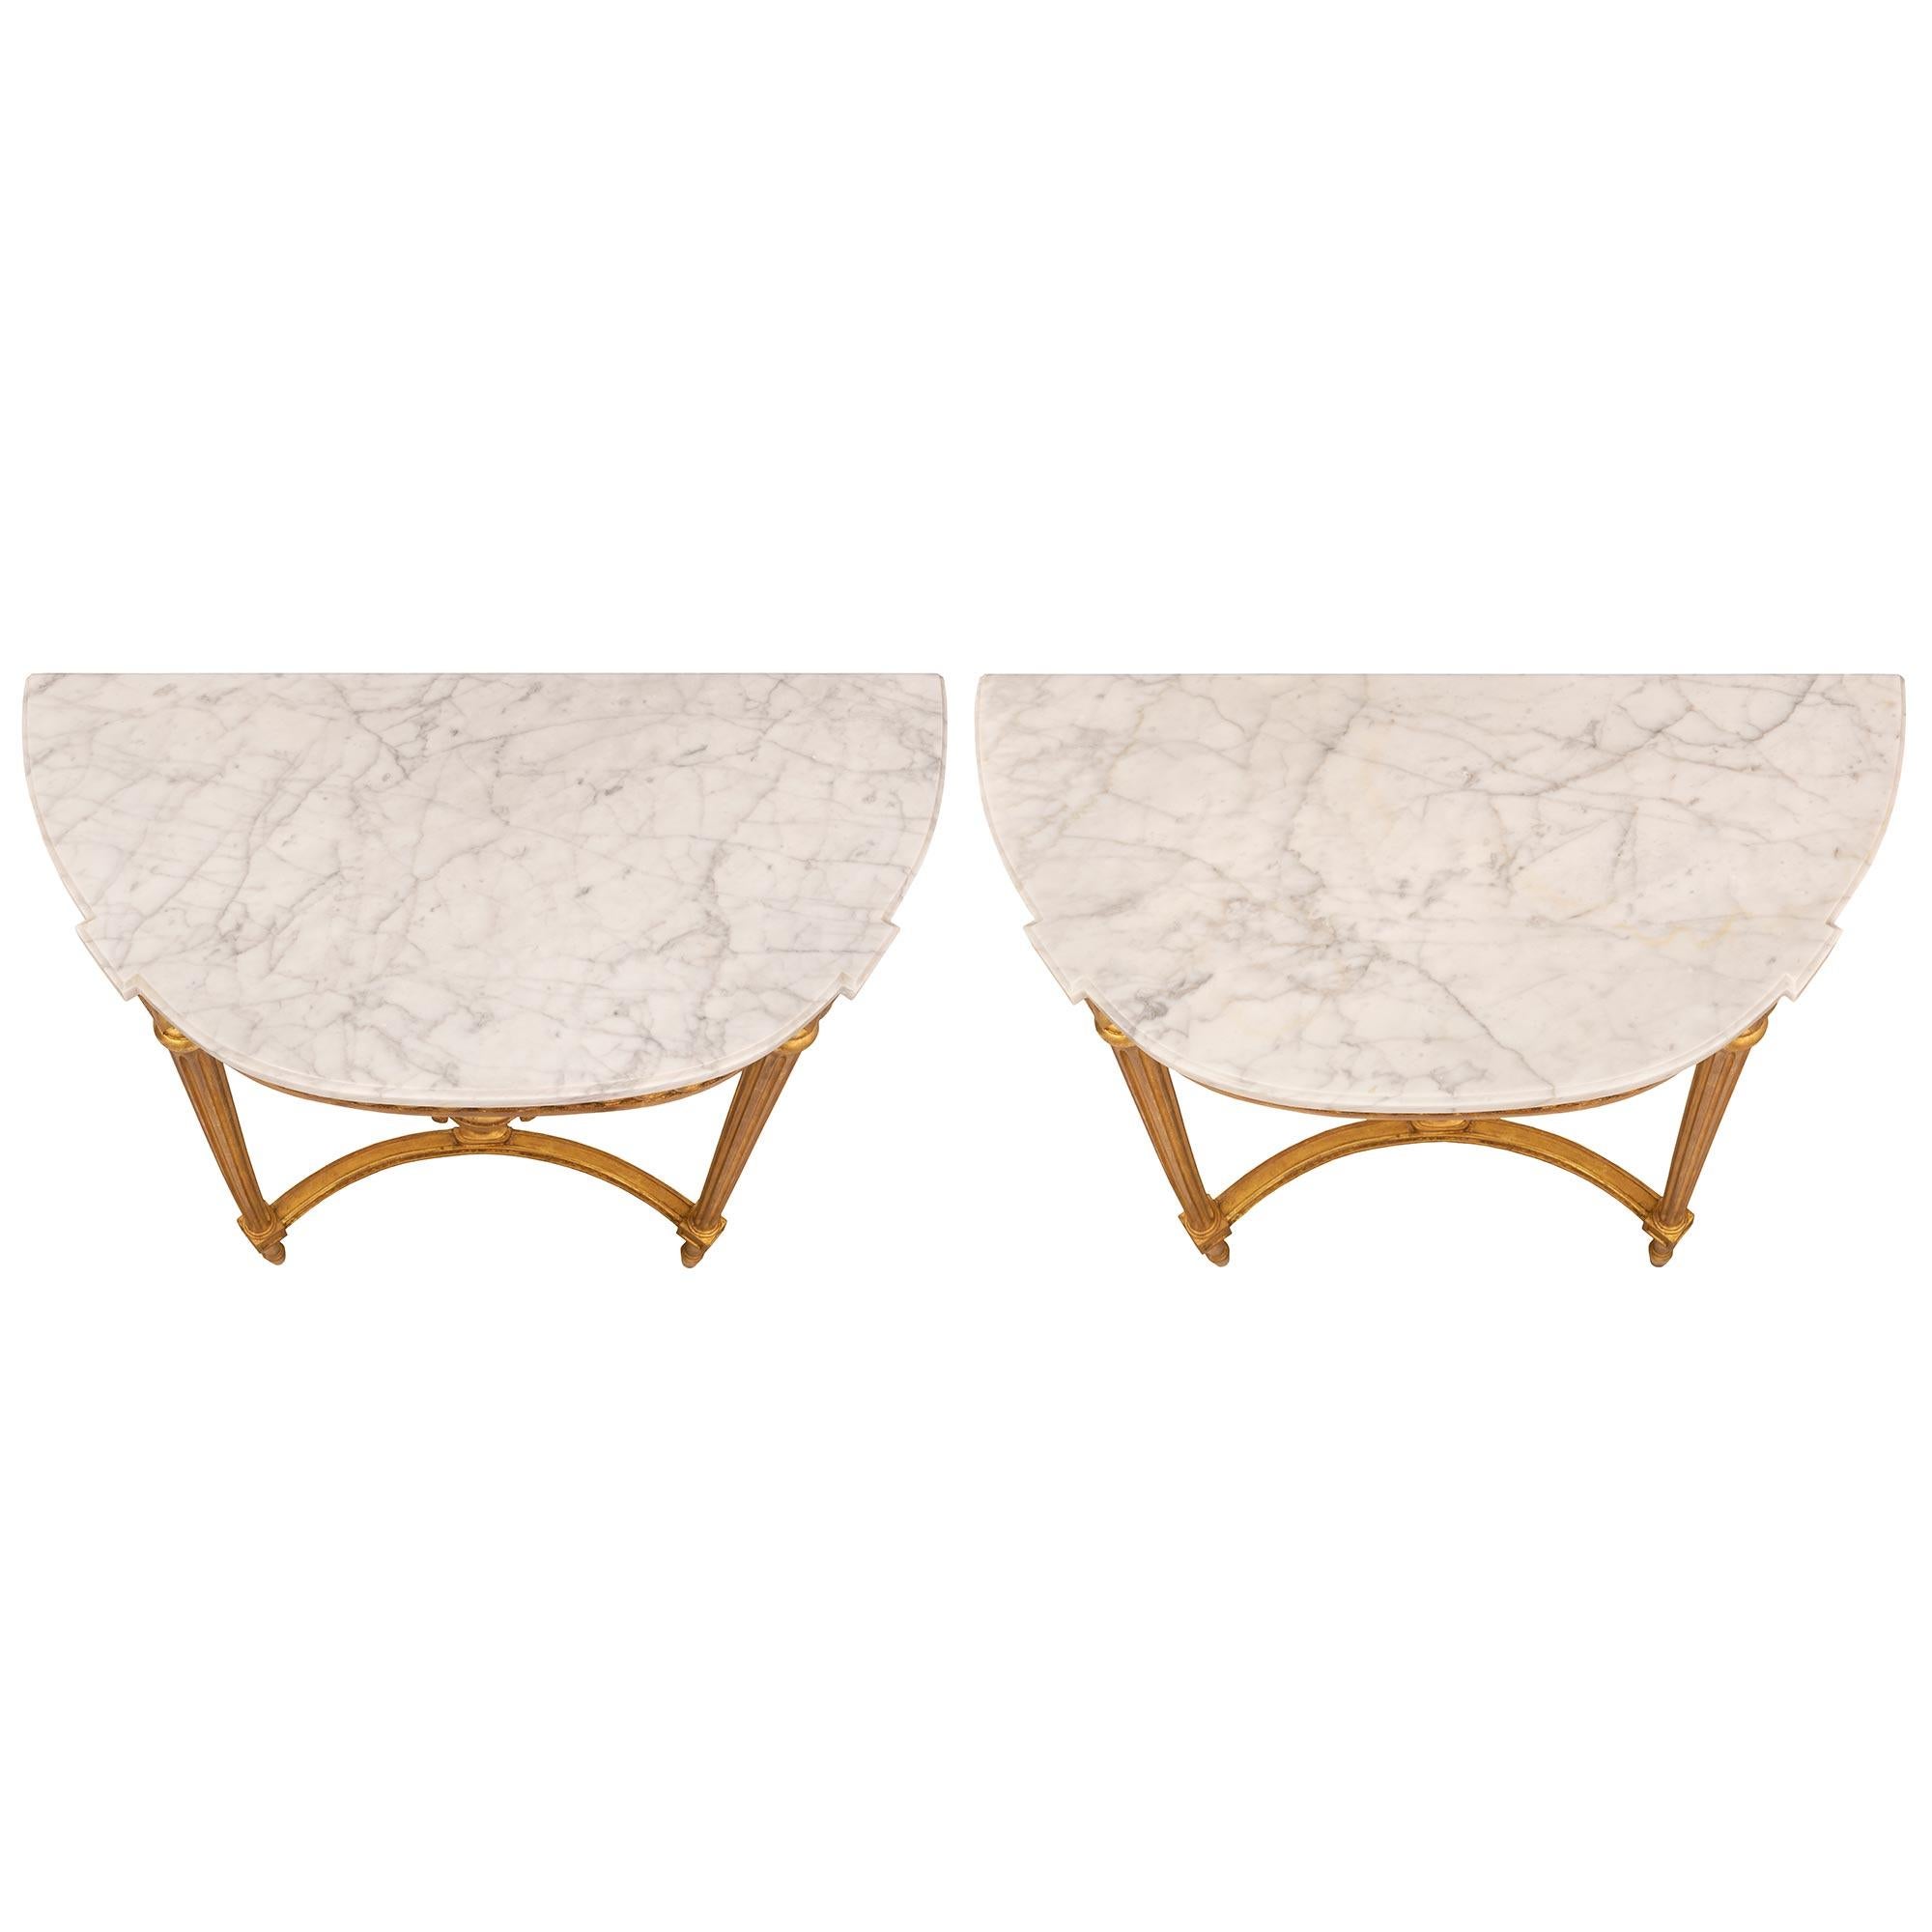 A most elegant pair of French turn of the century Louis XVI st. giltwood and white Carrara marble consoles. Each wall mounted console is raised by lovely slender circular tapered fluted legs with fine topie shaped feet. Above each foot are block